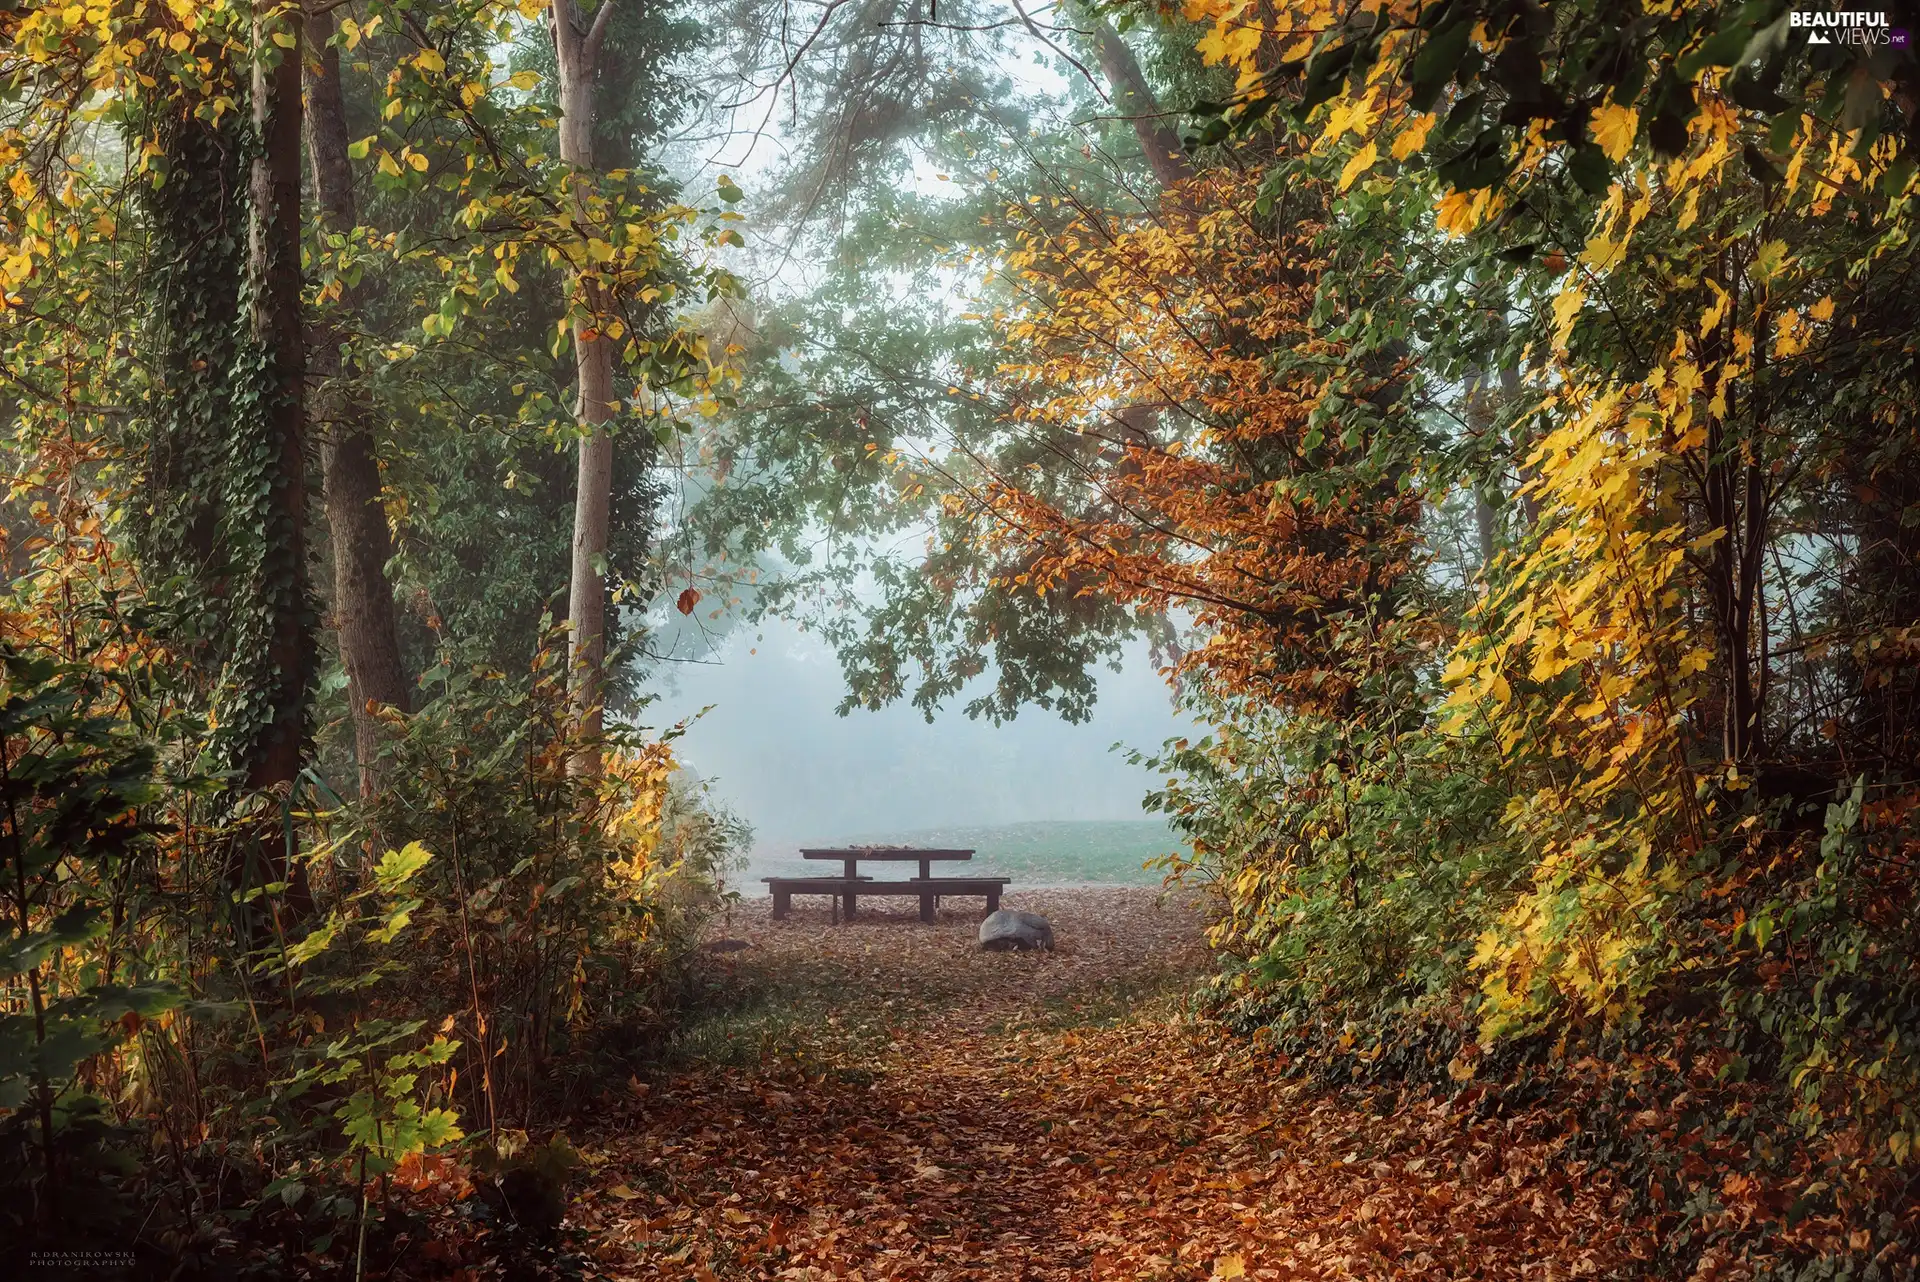 viewes, forest, Fog, Fallen Leaves, Bench, trees, autumn, Path